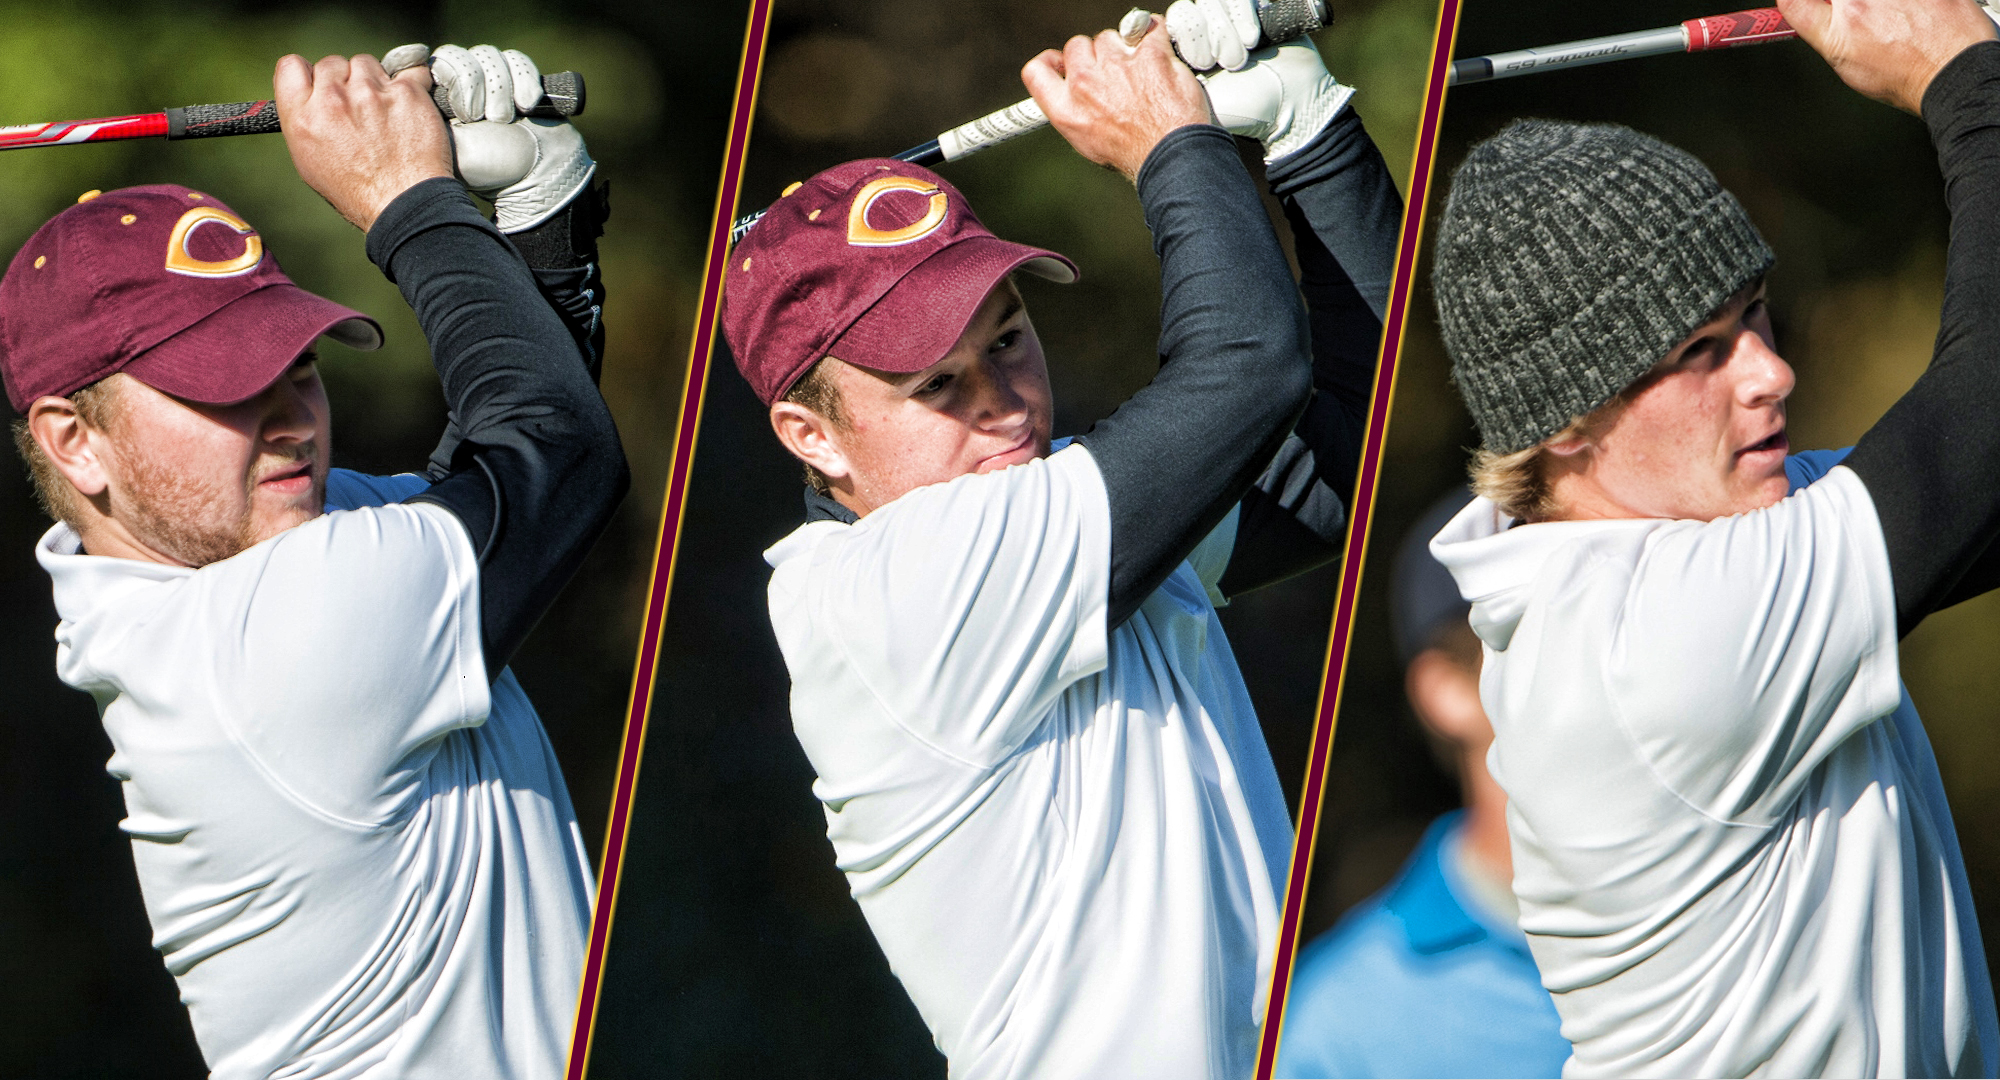 Nathaniel Kahlbaugh (L), Blake Kahlbaugh and Gage Stromme (R) all shot a 69 to lead the Cobbers to a single-round school record, and first place, at the Bobby Krig Invite.